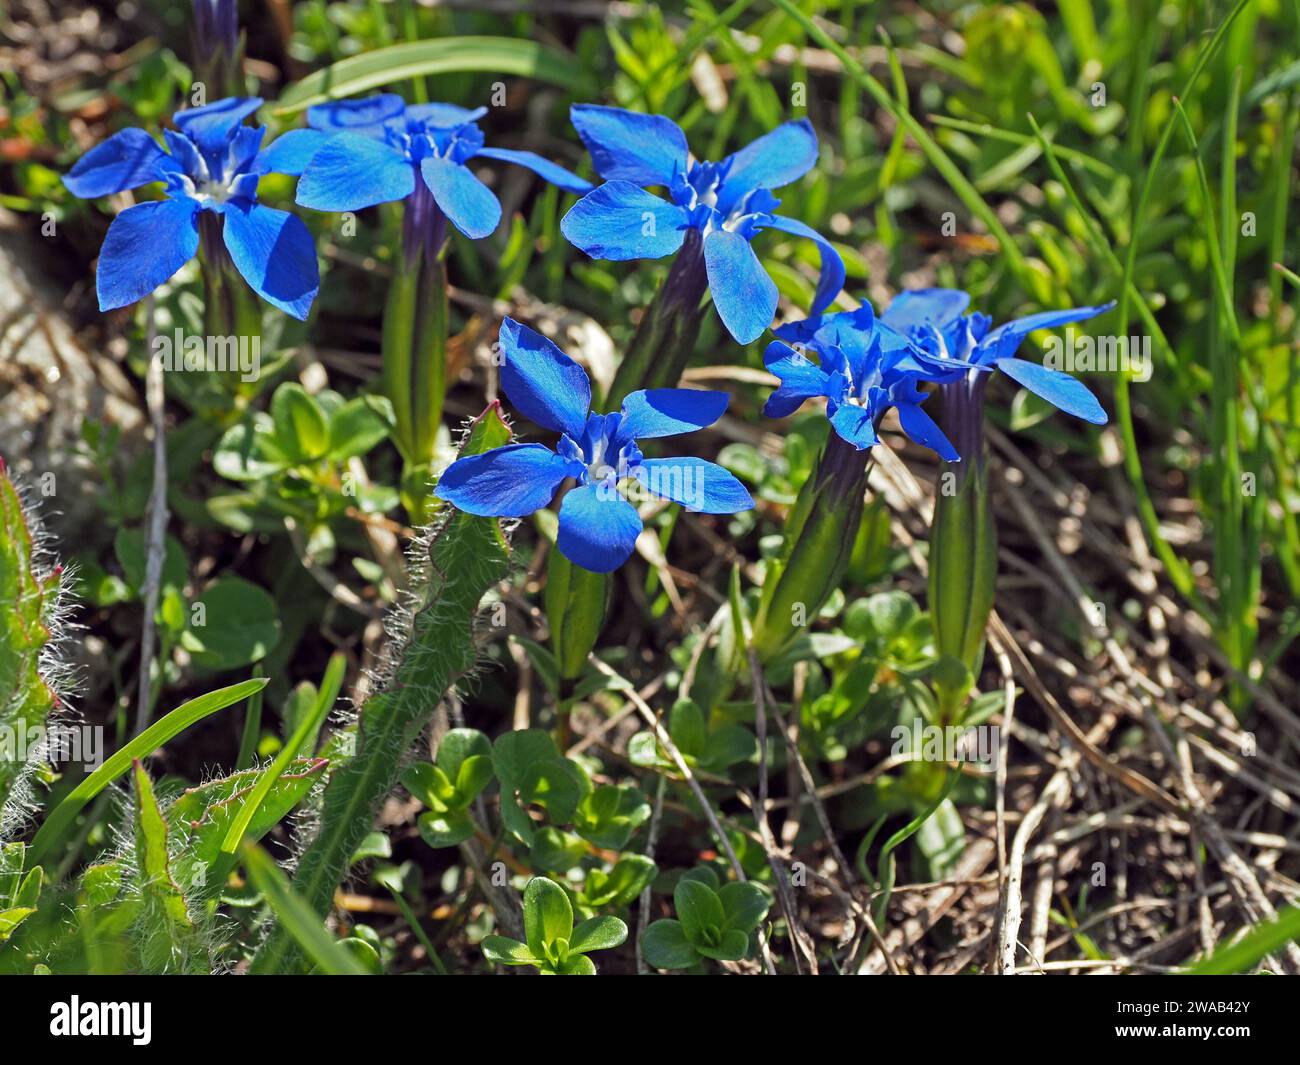 sunlit bright blue slender flowers of Spring Gentian (Gentiana verna) growing amid green grass & herbage in meadow in foothills of the Italian Alps Stock Photo